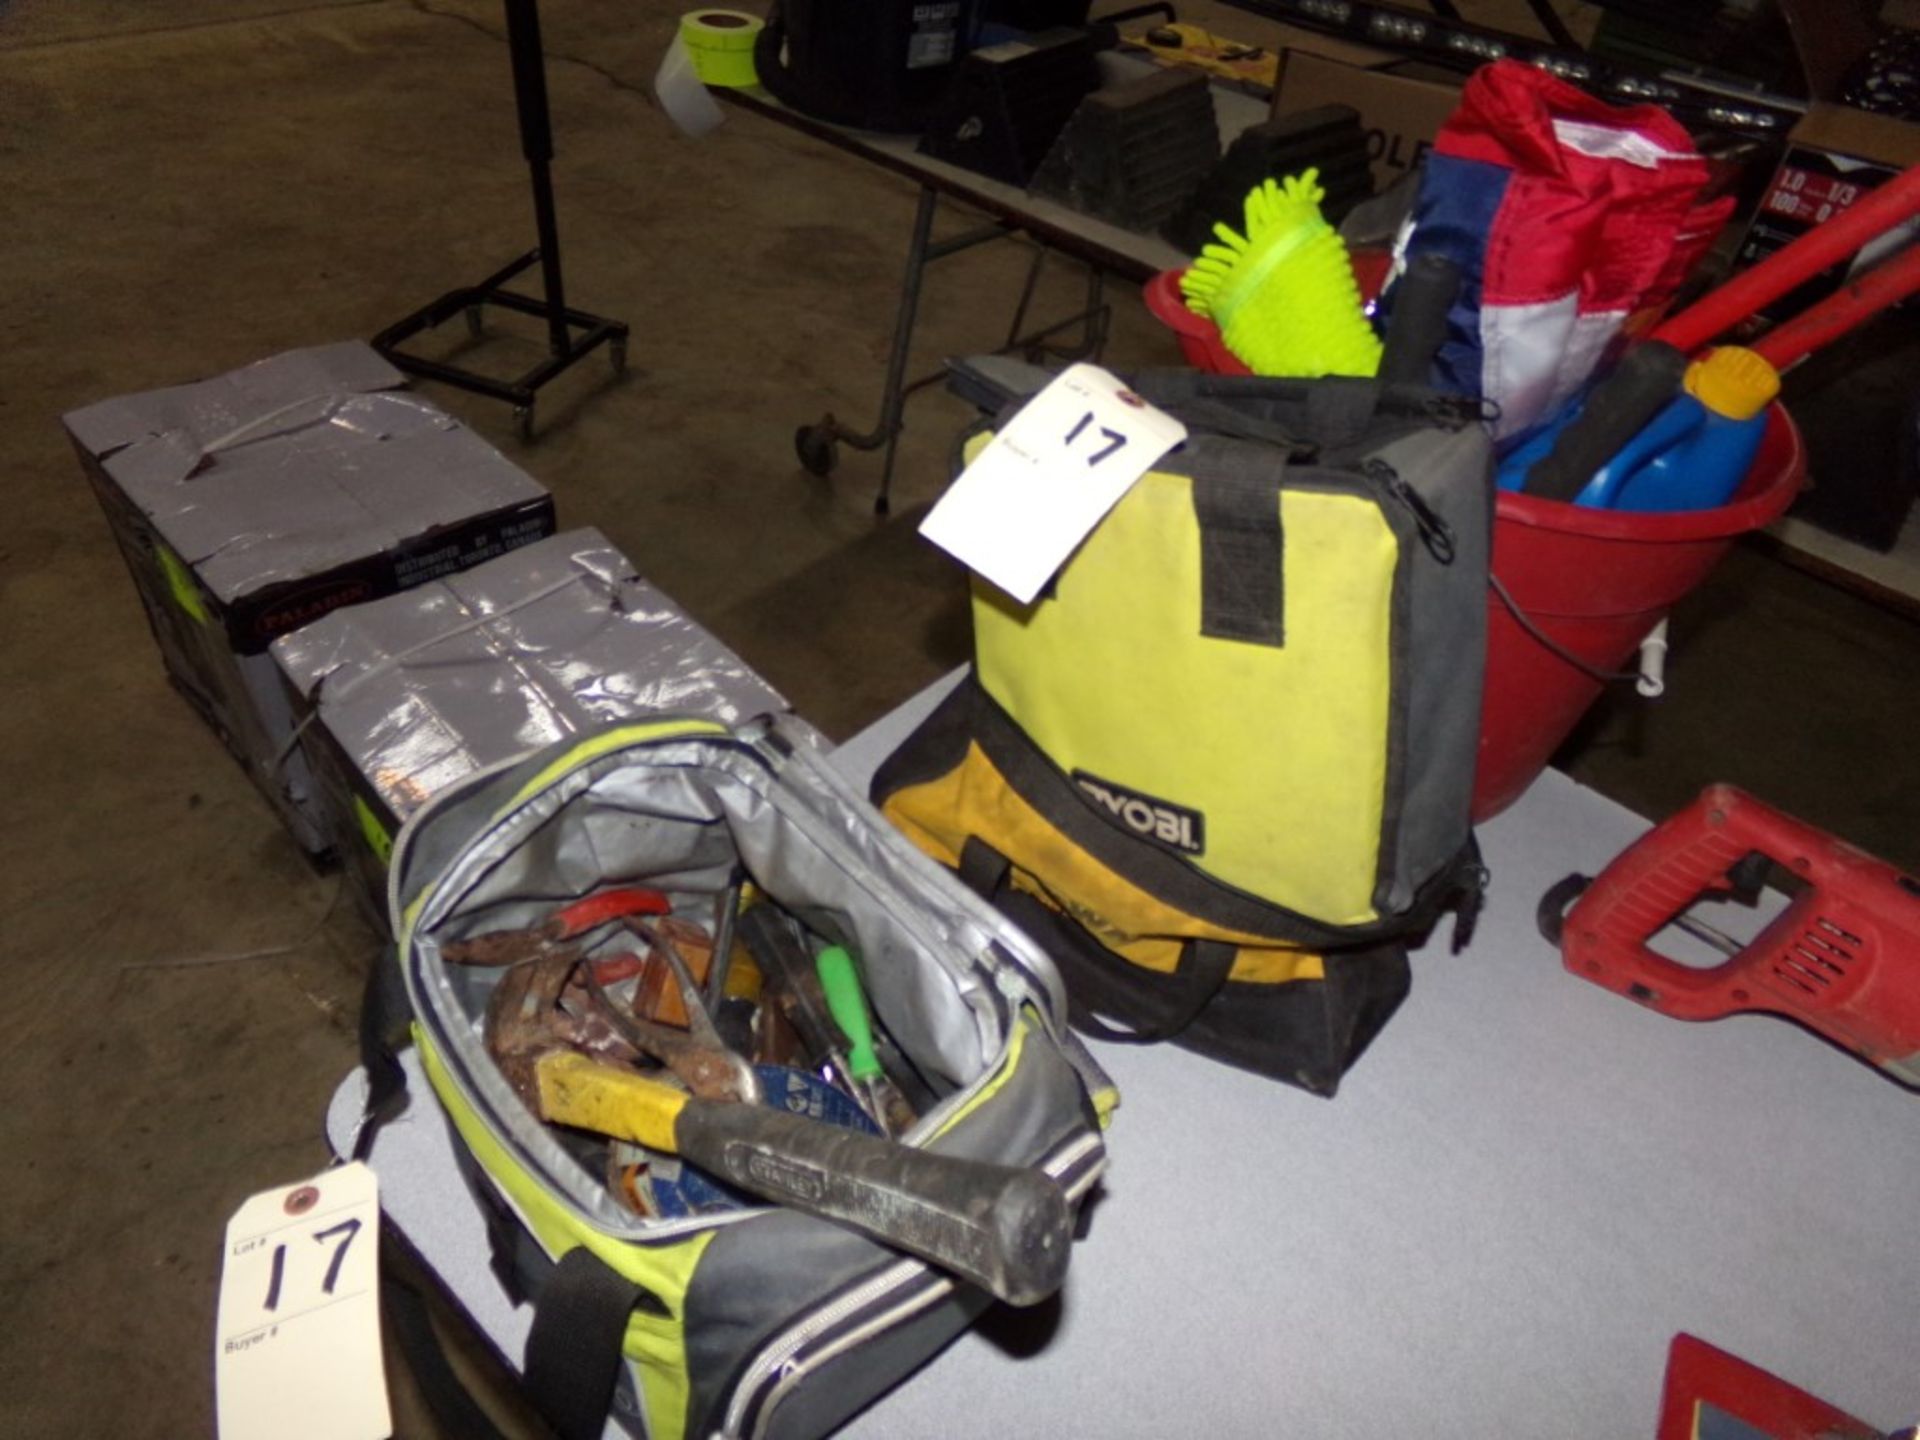 Igloo Soft Cooler With Misc Tools, (2) Soft Tool Bags (Ryobi and DeWalt) and Red Bucket With Bolt